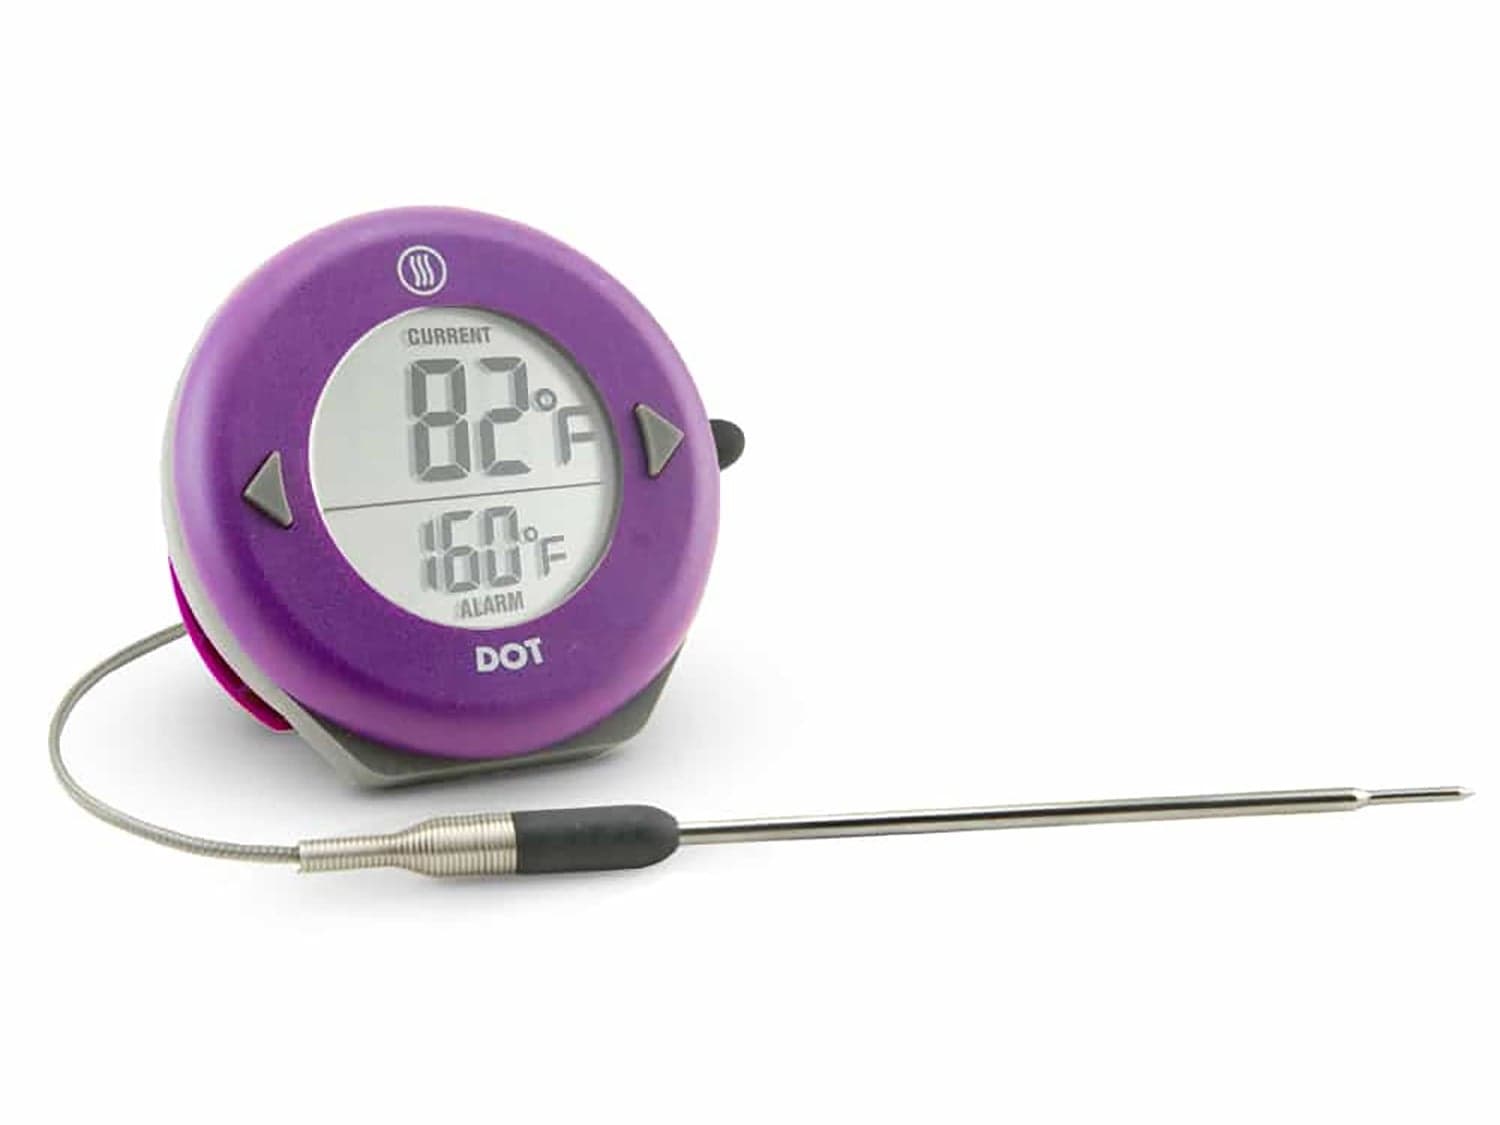 ThermoWorks Dot Simple Alarm Thermometer